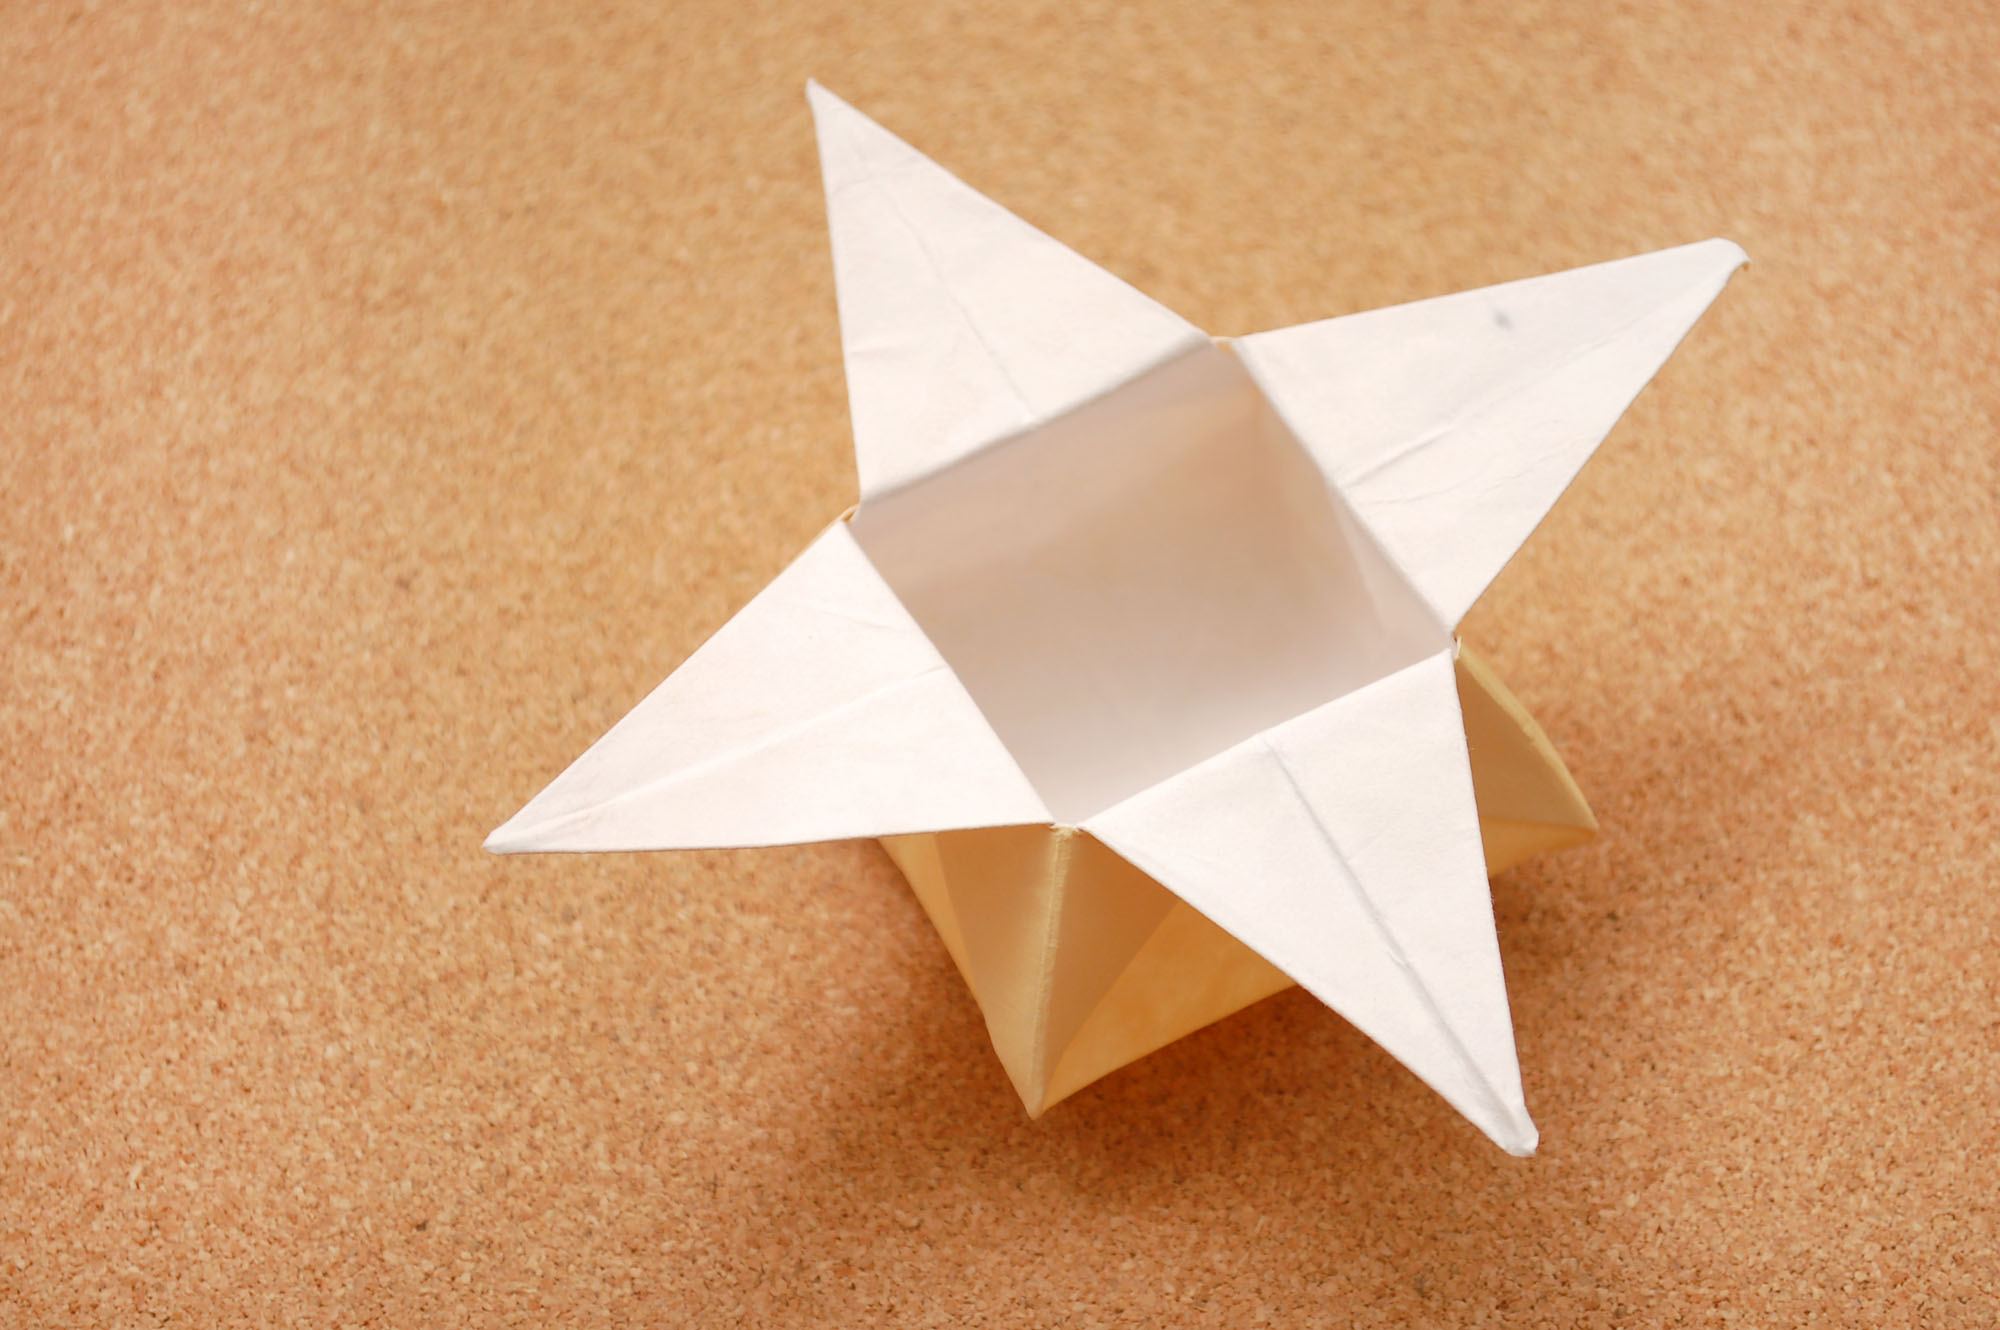 Origami Star How To Make How To Make An Origami Star Box With Pictures Wikihow